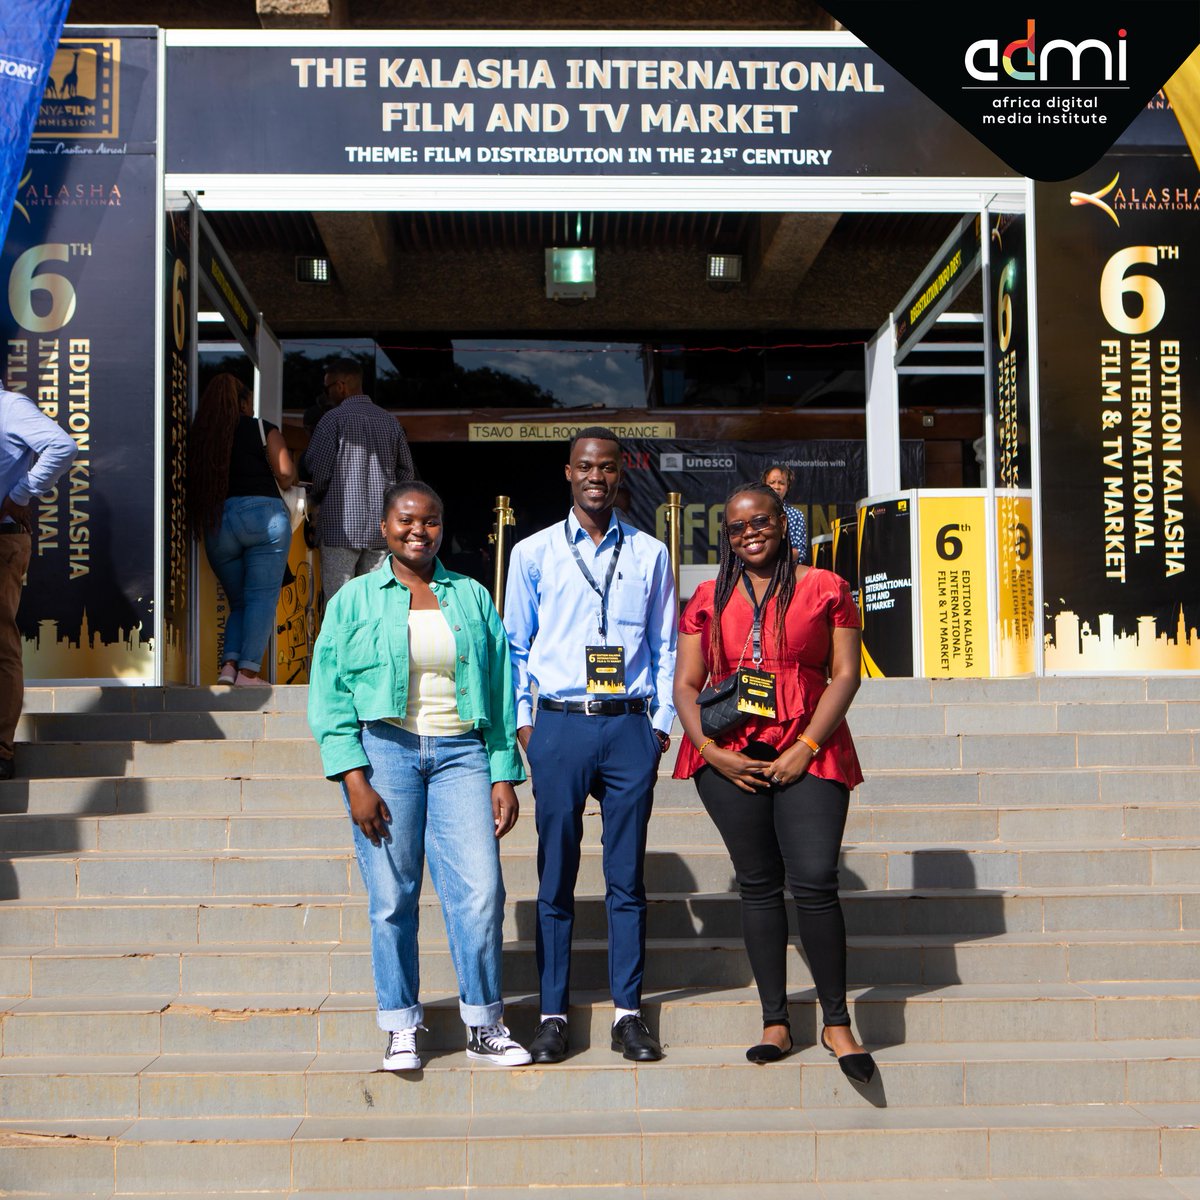 We recently had such a ball at the three-day 6th edition of the Kalasha International Film and TV Market at the KICC. We especially enjoyed screening a collection of African films, and we also learnt more about trading content and partnership opportunities.